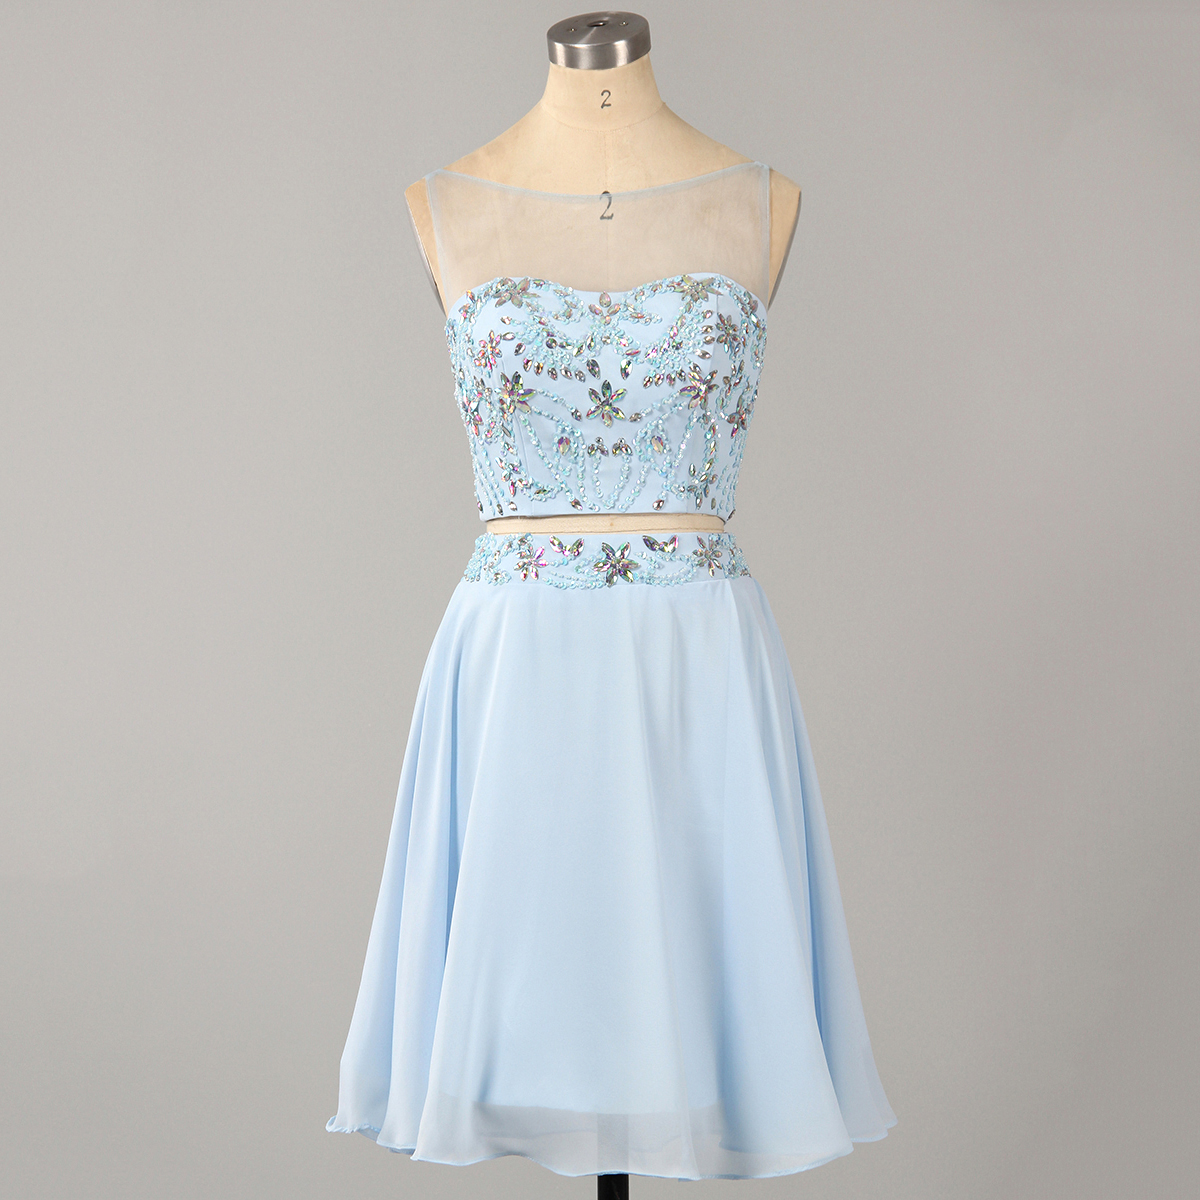 Illusion Mist Blue Low Back Homecoming Dress, Two Piece Short Homecoming Dress With Beads And Crystal, Chiffon Homecoming Dress